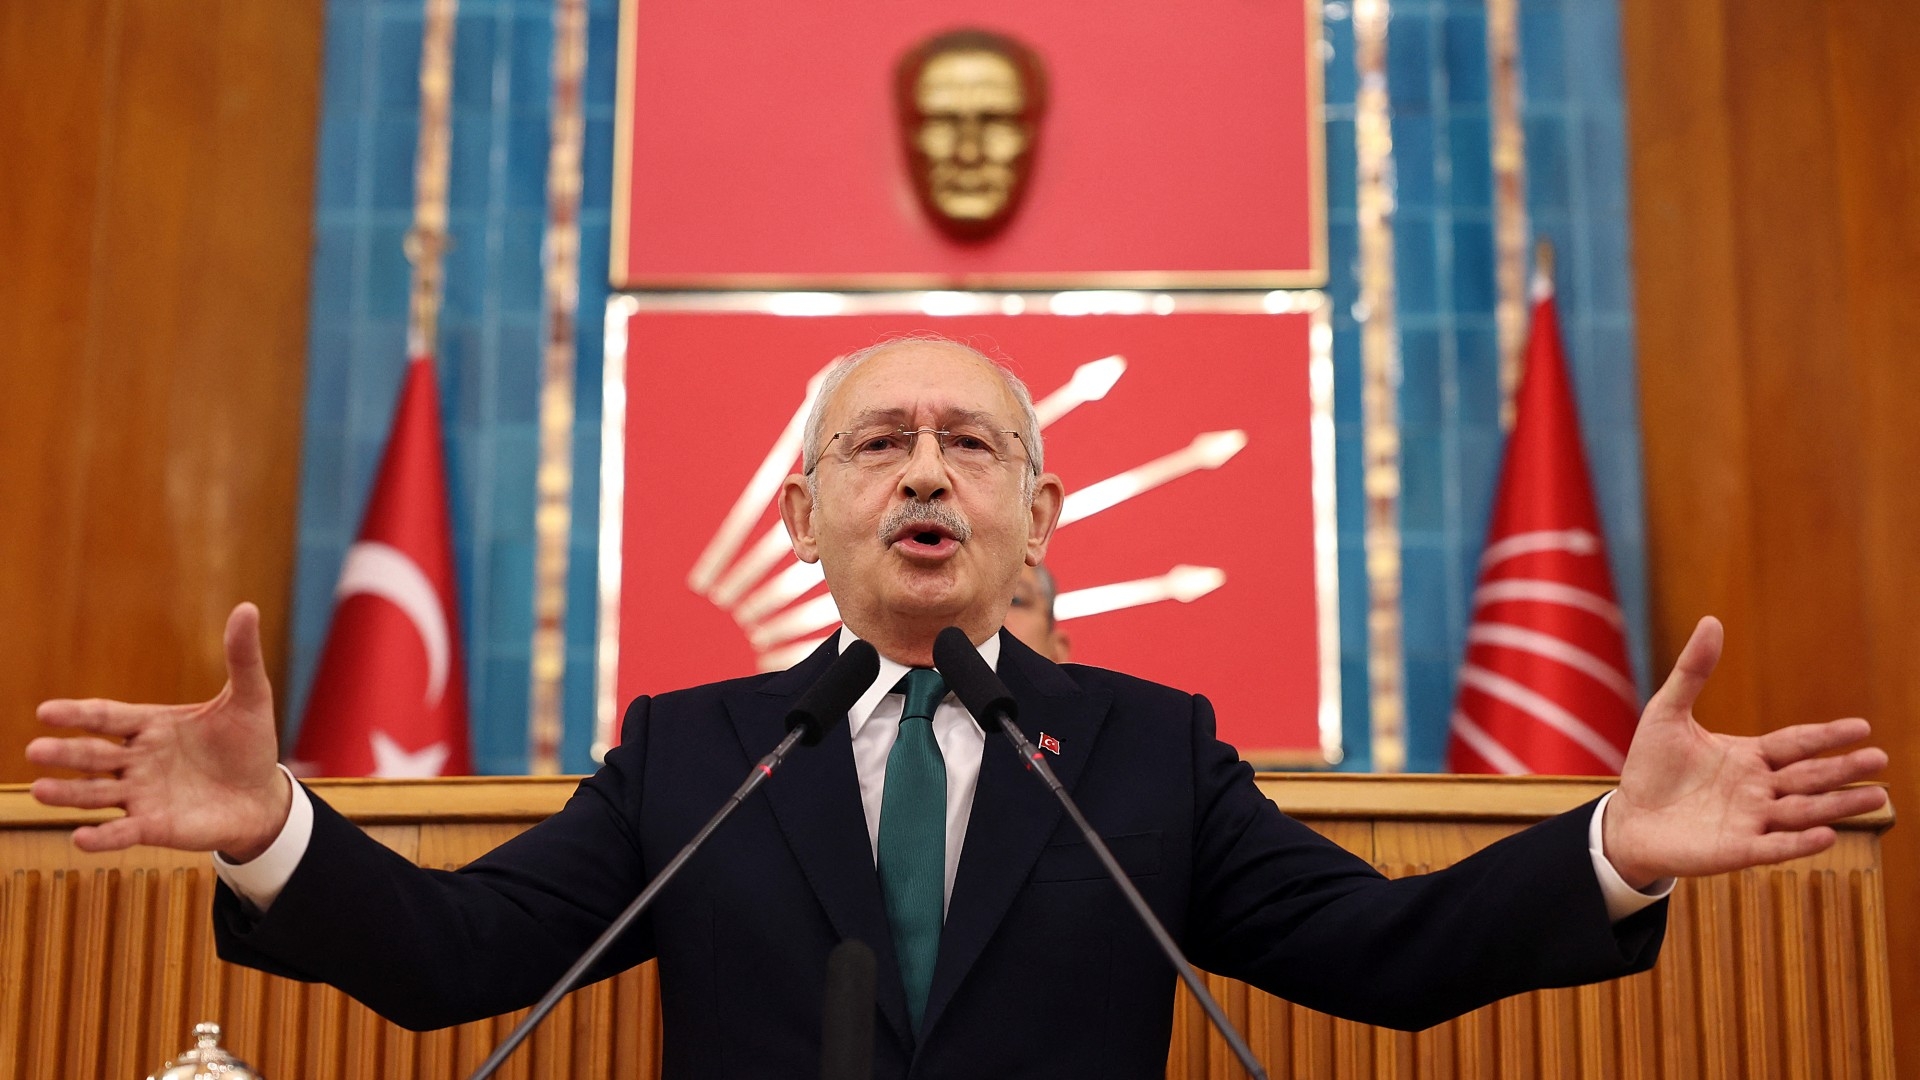 Leader of the Republican People's Party (CHP) Kemal Kilicdaroglu speaks during his party's group meeting at the Turkish Grand National Assembly in Ankara (AFP/File photo)